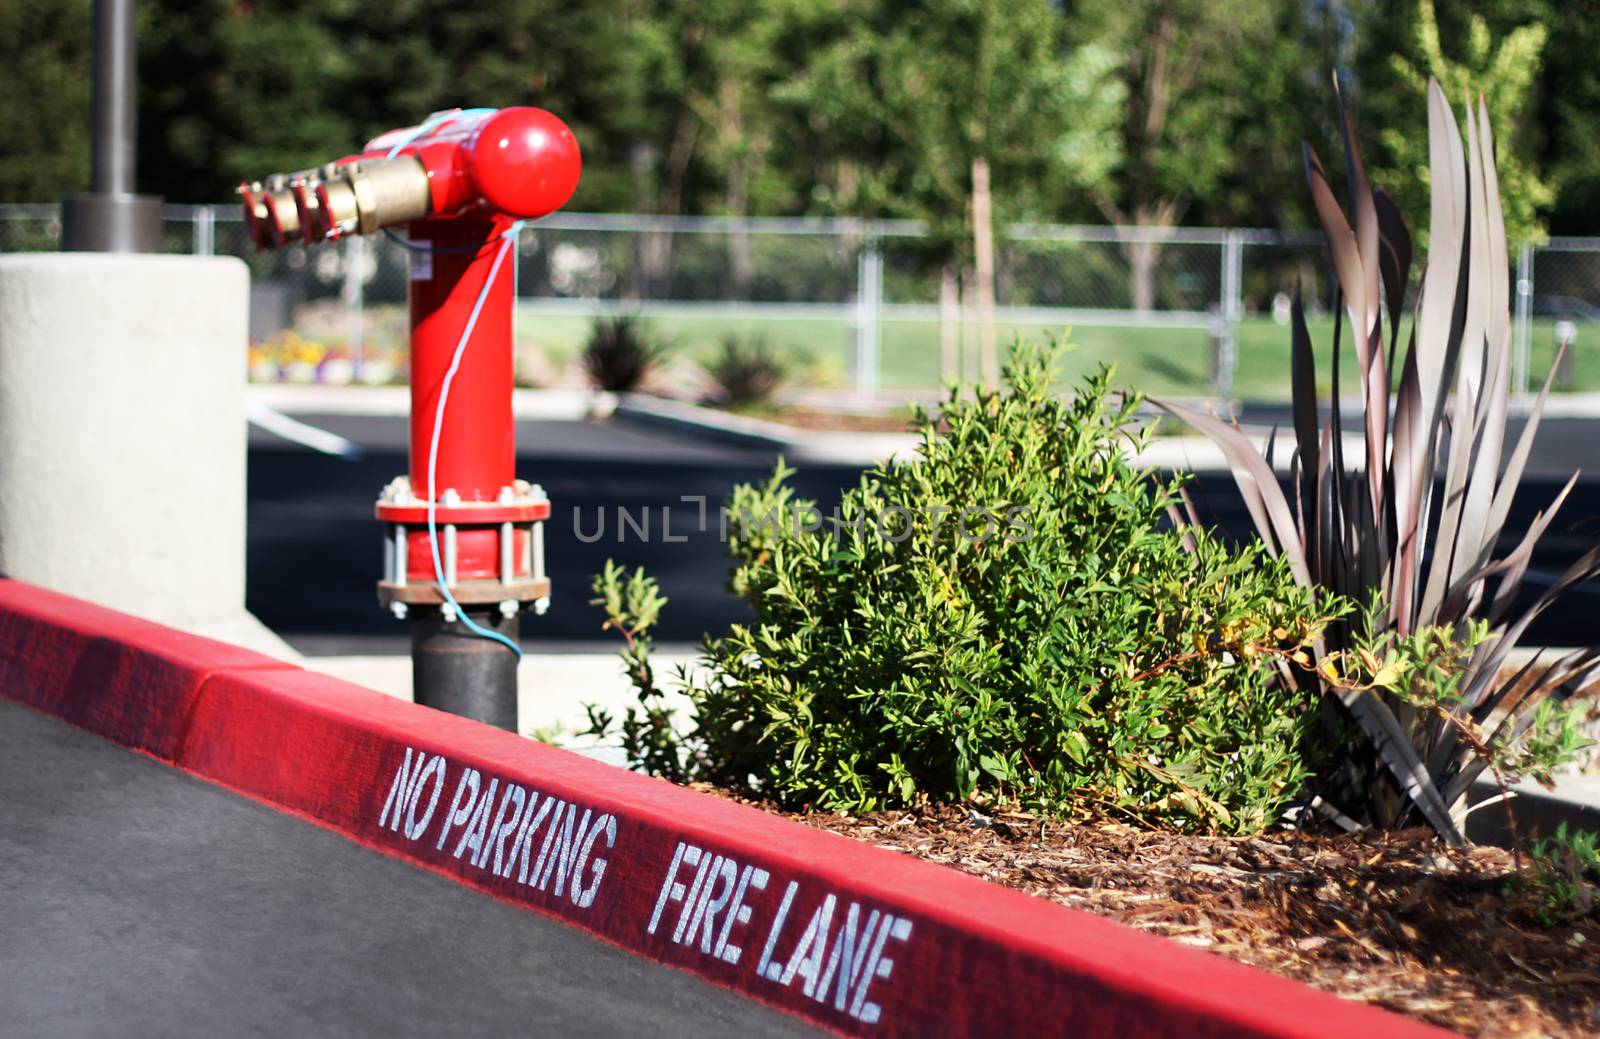 Fire Lane by ziss